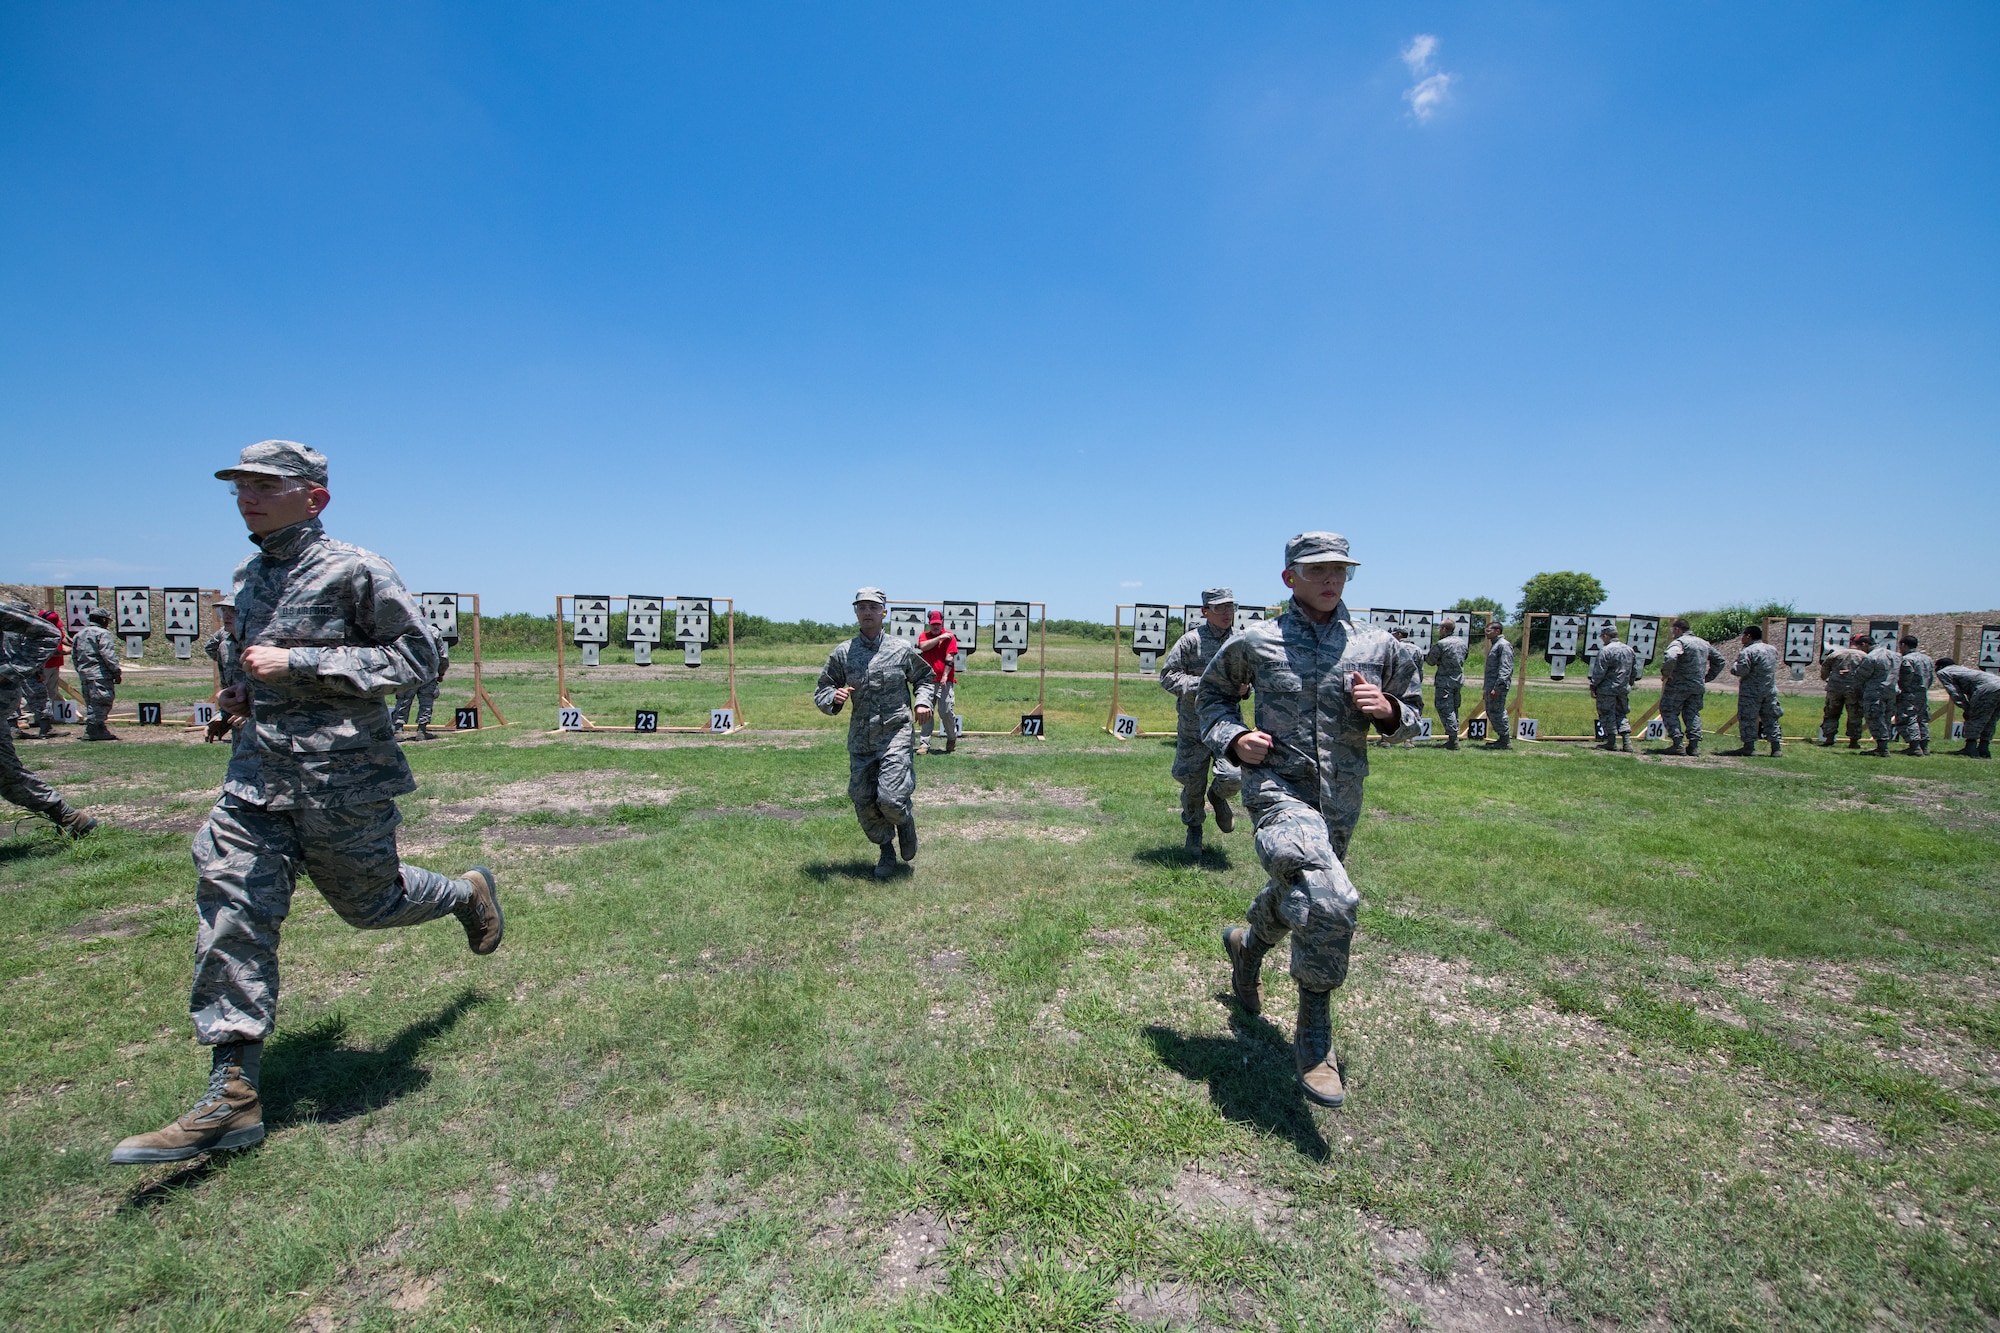 U.S. Air Force BMTs run back to their firing position after seeing their targets during a weapons familiarization course, June 8, 2019, at Joint Base San Antonio-Medina Annex. BMT trainees were the first to experience M-4 Carbine Weapons Familiarization Course at the new facility, which closed in November 2018, due to improper rainwater drainage. The firing range allows instructors to train 244 BMT trainees daily, four days a week, qualifying more than 40,000 BMT trainees in the M-4 carbine annually. (U.S. Air Force photo by Sarayuth Pinthong)